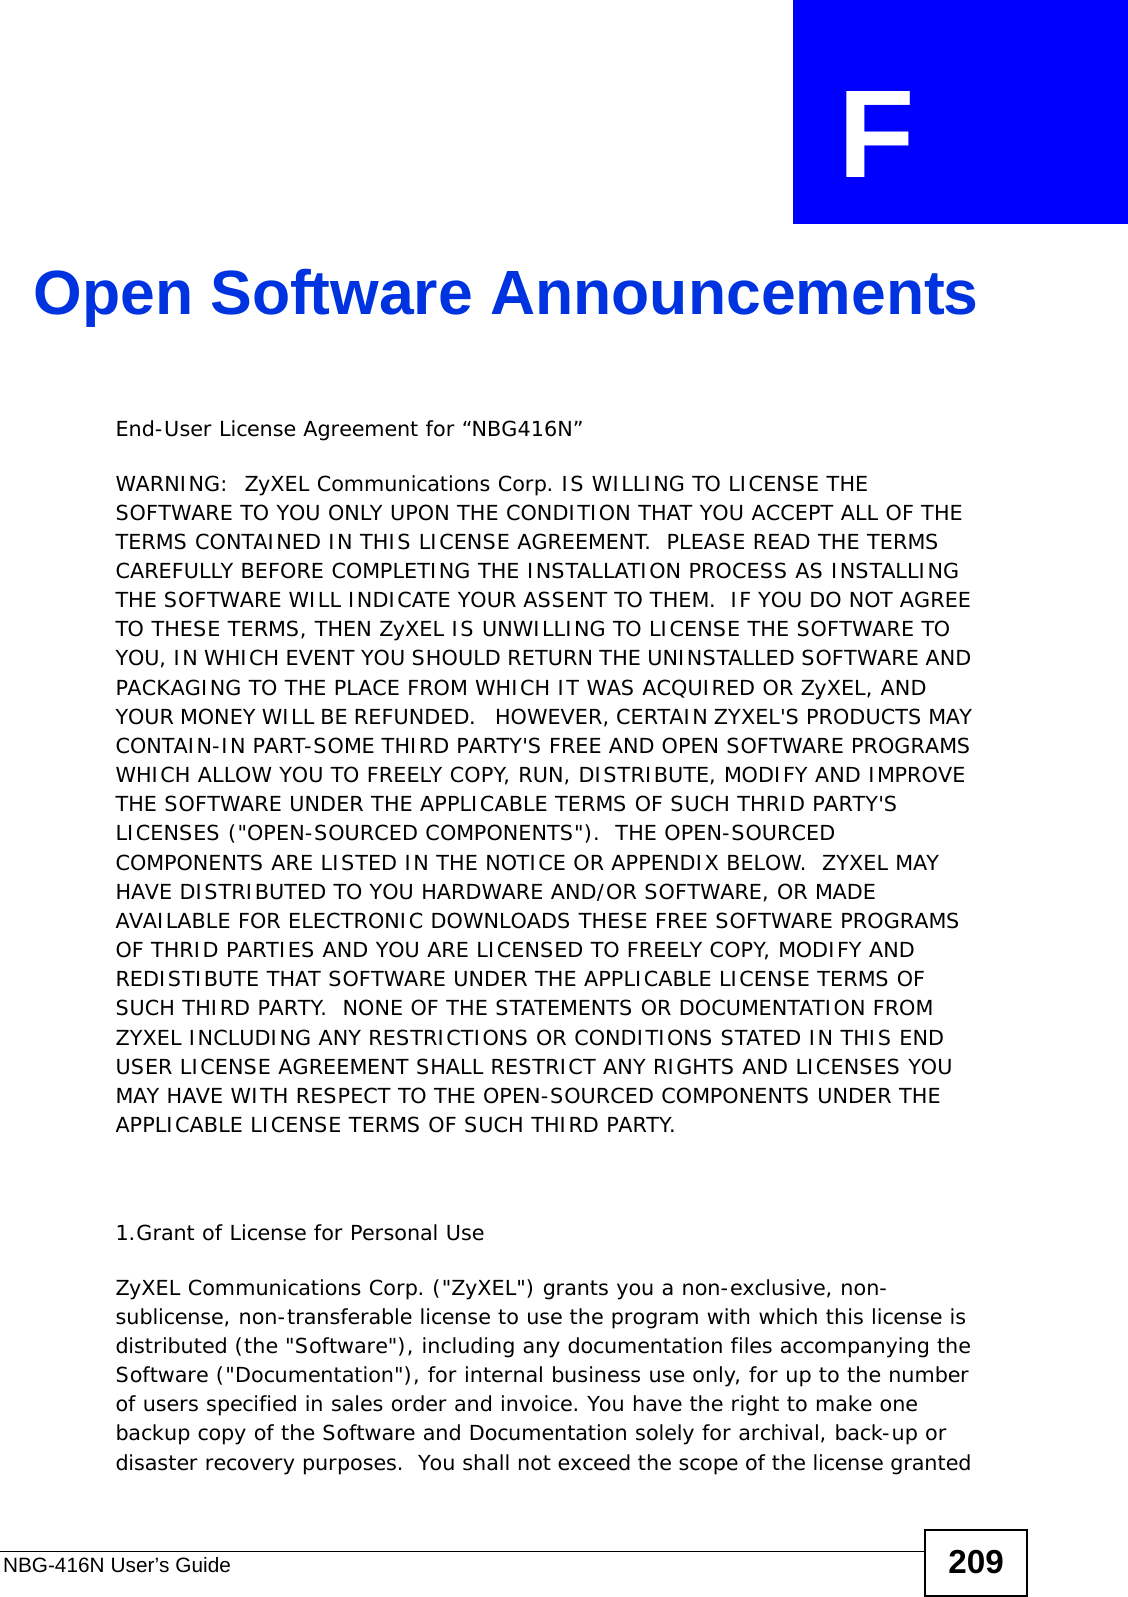 NBG-416N User’s Guide 209APPENDIX  F Open Software AnnouncementsEnd-User License Agreement for “NBG416N” WARNING:  ZyXEL Communications Corp. IS WILLING TO LICENSE THE SOFTWARE TO YOU ONLY UPON THE CONDITION THAT YOU ACCEPT ALL OF THE TERMS CONTAINED IN THIS LICENSE AGREEMENT.  PLEASE READ THE TERMS CAREFULLY BEFORE COMPLETING THE INSTALLATION PROCESS AS INSTALLING THE SOFTWARE WILL INDICATE YOUR ASSENT TO THEM.  IF YOU DO NOT AGREE TO THESE TERMS, THEN ZyXEL IS UNWILLING TO LICENSE THE SOFTWARE TO YOU, IN WHICH EVENT YOU SHOULD RETURN THE UNINSTALLED SOFTWARE AND PACKAGING TO THE PLACE FROM WHICH IT WAS ACQUIRED OR ZyXEL, AND YOUR MONEY WILL BE REFUNDED.   HOWEVER, CERTAIN ZYXEL&apos;S PRODUCTS MAY CONTAIN-IN PART-SOME THIRD PARTY&apos;S FREE AND OPEN SOFTWARE PROGRAMS WHICH ALLOW YOU TO FREELY COPY, RUN, DISTRIBUTE, MODIFY AND IMPROVE THE SOFTWARE UNDER THE APPLICABLE TERMS OF SUCH THRID PARTY&apos;S LICENSES (&quot;OPEN-SOURCED COMPONENTS&quot;).  THE OPEN-SOURCED COMPONENTS ARE LISTED IN THE NOTICE OR APPENDIX BELOW.  ZYXEL MAY HAVE DISTRIBUTED TO YOU HARDWARE AND/OR SOFTWARE, OR MADE AVAILABLE FOR ELECTRONIC DOWNLOADS THESE FREE SOFTWARE PROGRAMS OF THRID PARTIES AND YOU ARE LICENSED TO FREELY COPY, MODIFY AND REDISTIBUTE THAT SOFTWARE UNDER THE APPLICABLE LICENSE TERMS OF SUCH THIRD PARTY.  NONE OF THE STATEMENTS OR DOCUMENTATION FROM ZYXEL INCLUDING ANY RESTRICTIONS OR CONDITIONS STATED IN THIS END USER LICENSE AGREEMENT SHALL RESTRICT ANY RIGHTS AND LICENSES YOU MAY HAVE WITH RESPECT TO THE OPEN-SOURCED COMPONENTS UNDER THE APPLICABLE LICENSE TERMS OF SUCH THIRD PARTY.   1.Grant of License for Personal UseZyXEL Communications Corp. (&quot;ZyXEL&quot;) grants you a non-exclusive, non-sublicense, non-transferable license to use the program with which this license is distributed (the &quot;Software&quot;), including any documentation files accompanying the Software (&quot;Documentation&quot;), for internal business use only, for up to the number of users specified in sales order and invoice. You have the right to make one backup copy of the Software and Documentation solely for archival, back-up or disaster recovery purposes.  You shall not exceed the scope of the license granted 